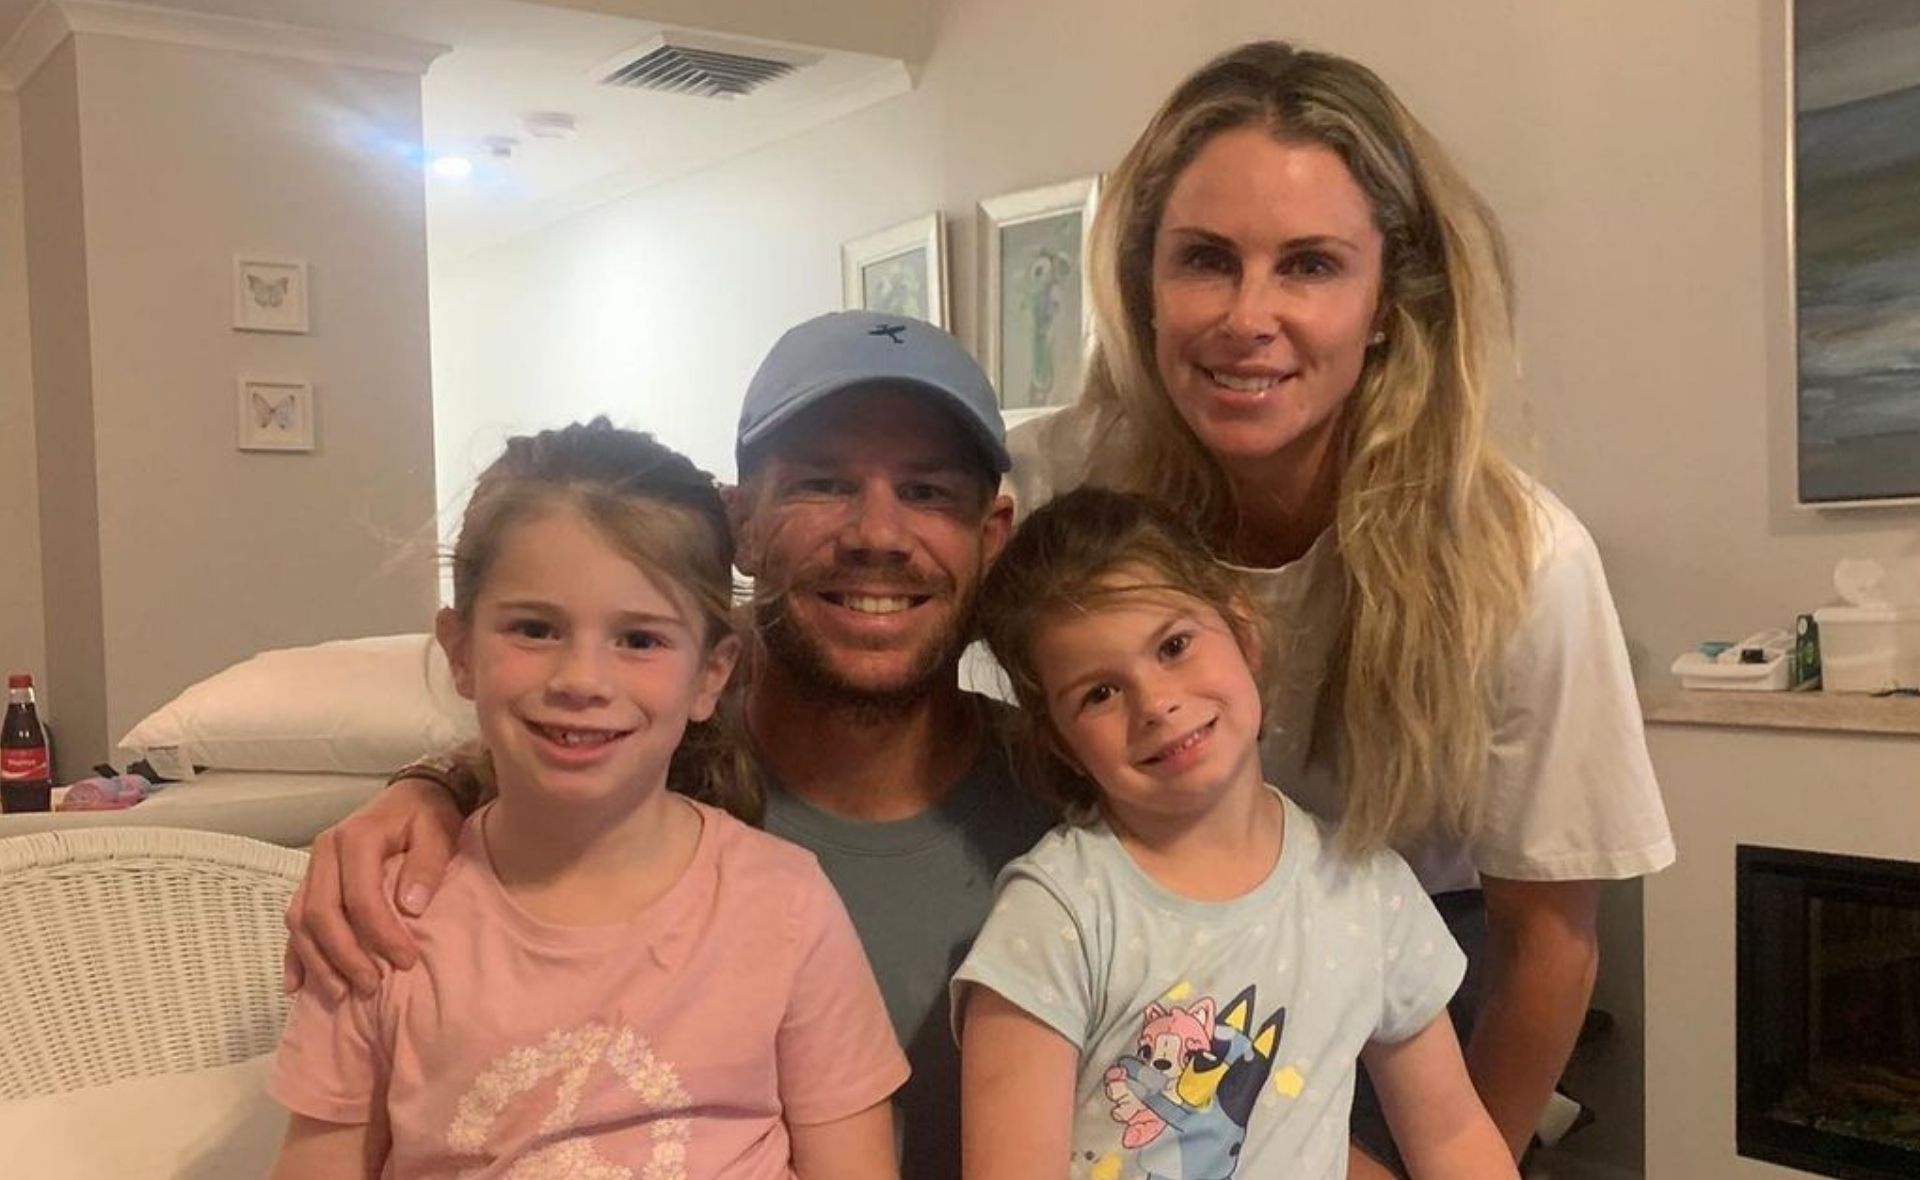 David Warner bids his family an emotional farewell as he is forced to separate from them again